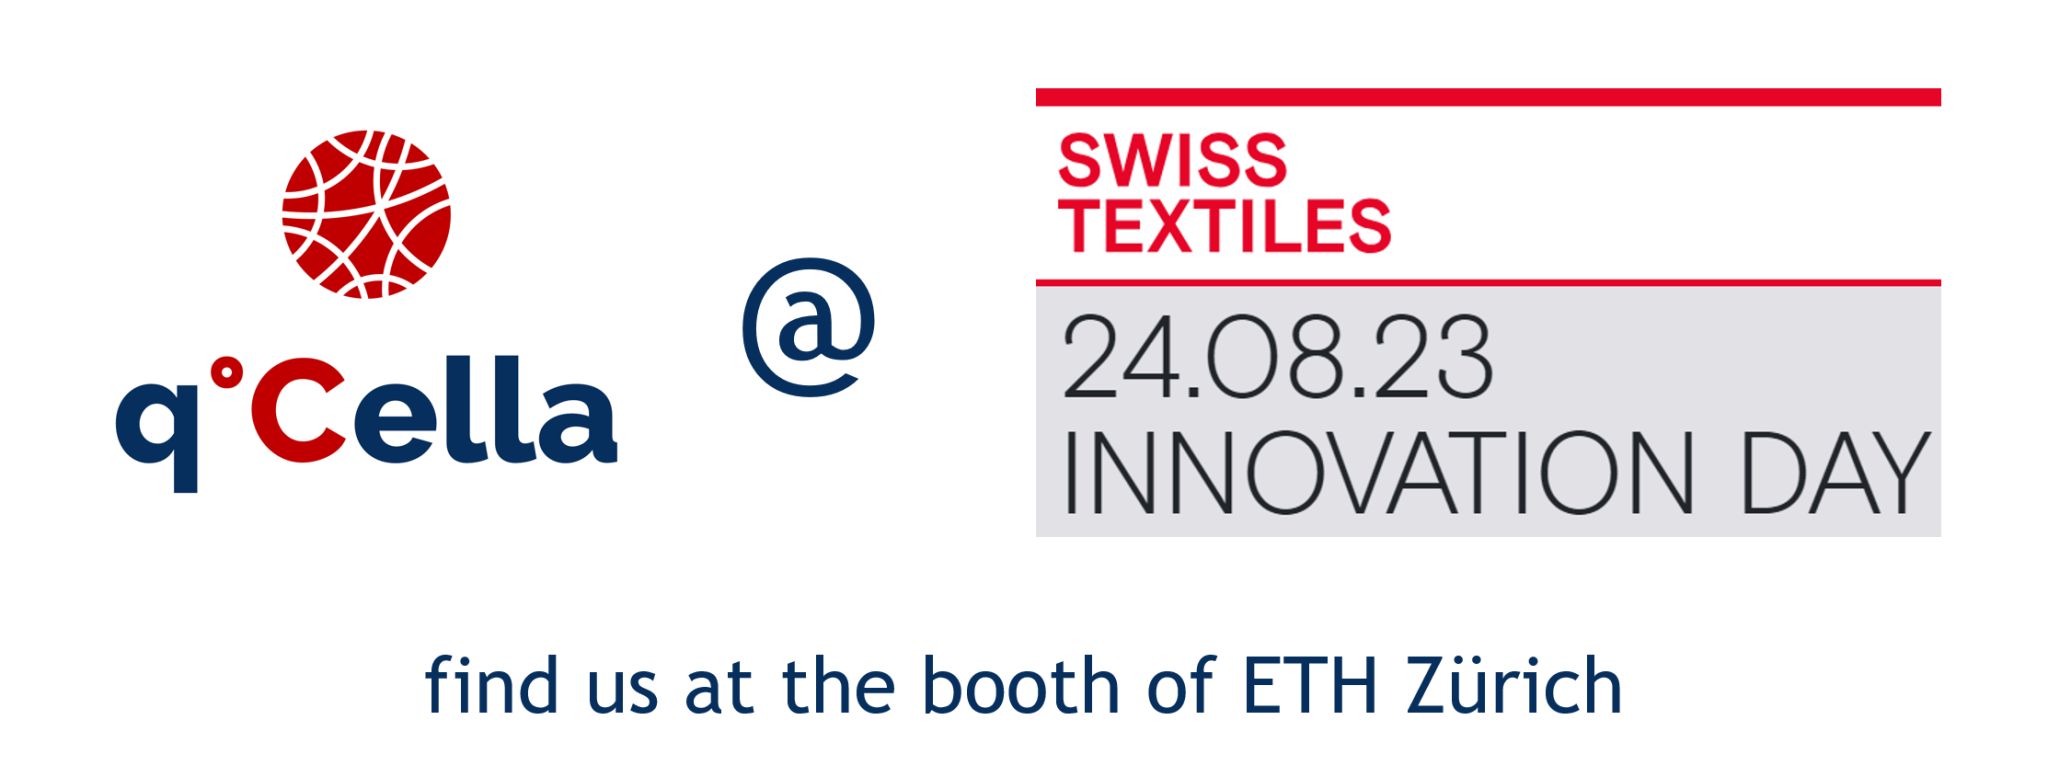 qCella at the Innovation Day of Swiss Textiles